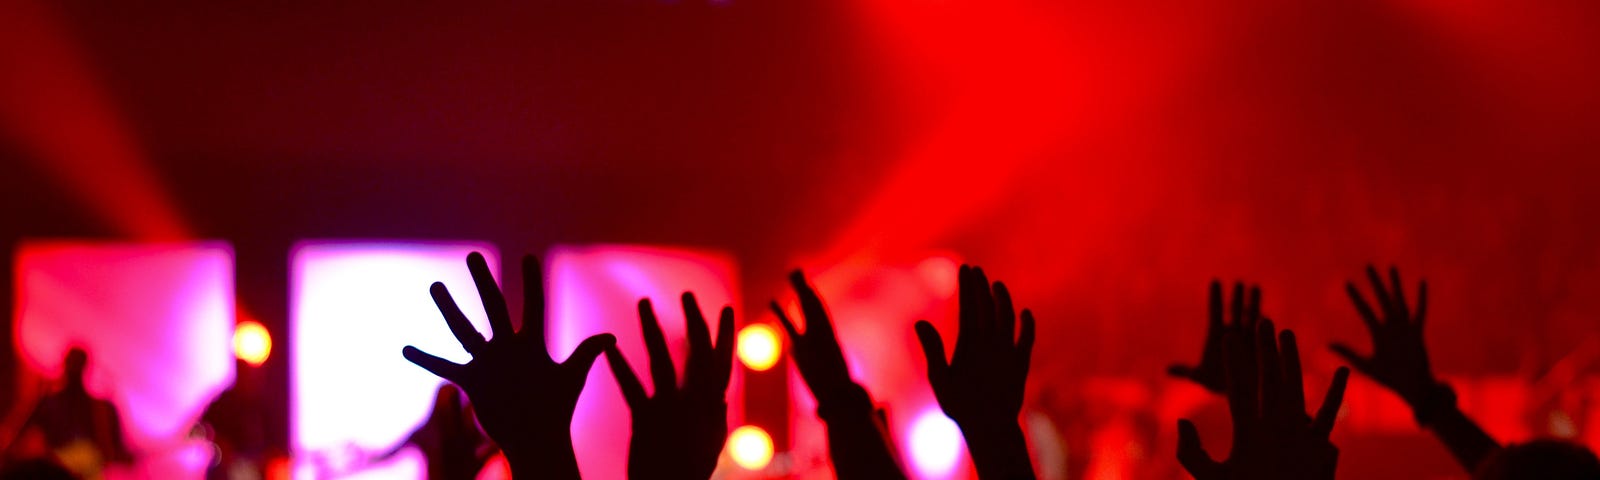 Hands raised at a live show with “Community” appearing on the screen on the stage.